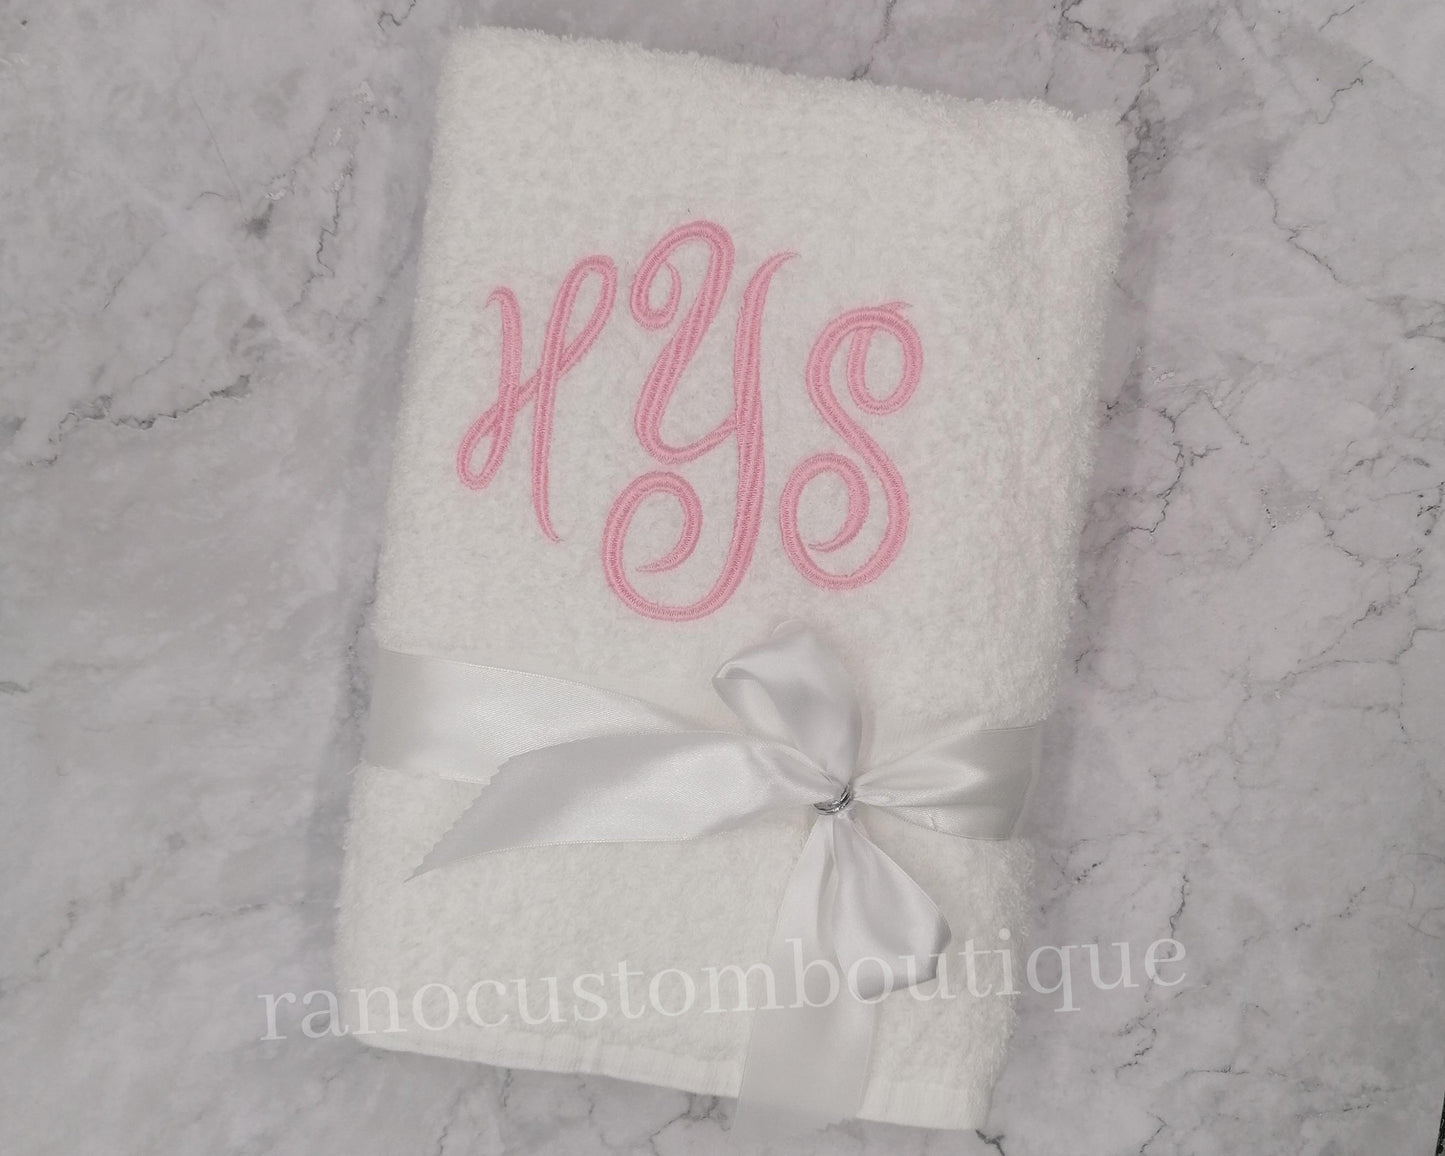 Personalized Embroidered Towel, Monogrammed Towel, Embroidered Design, Wedding Gifts, Custom Name Towel